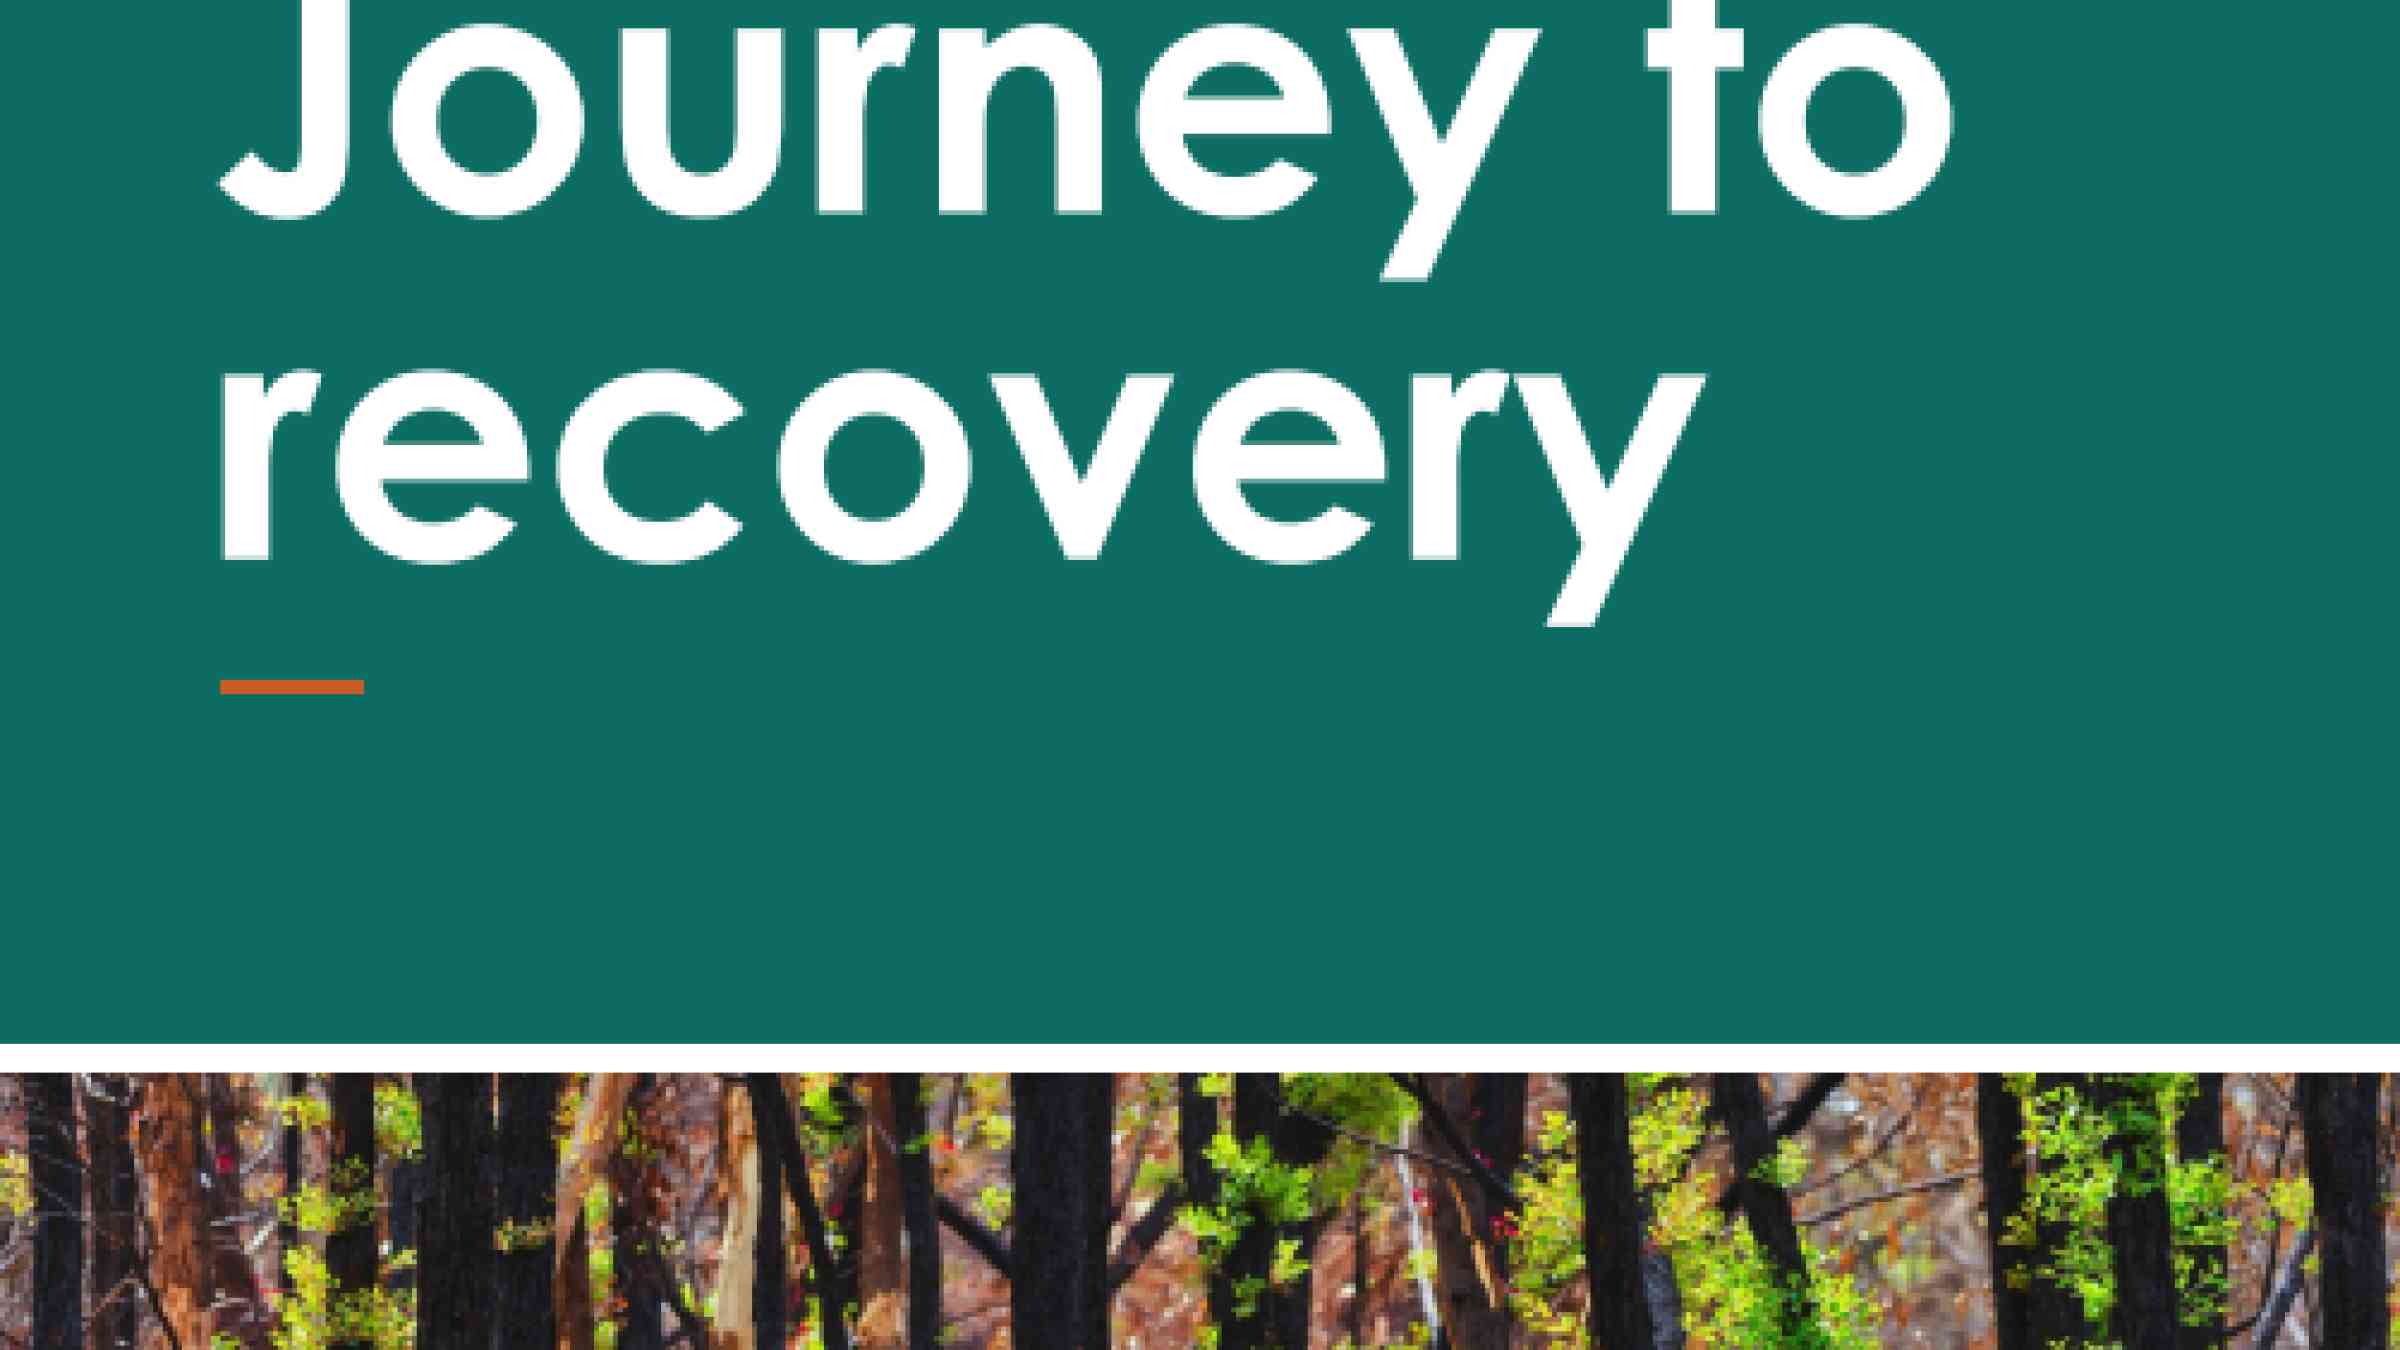 Journey to recovery